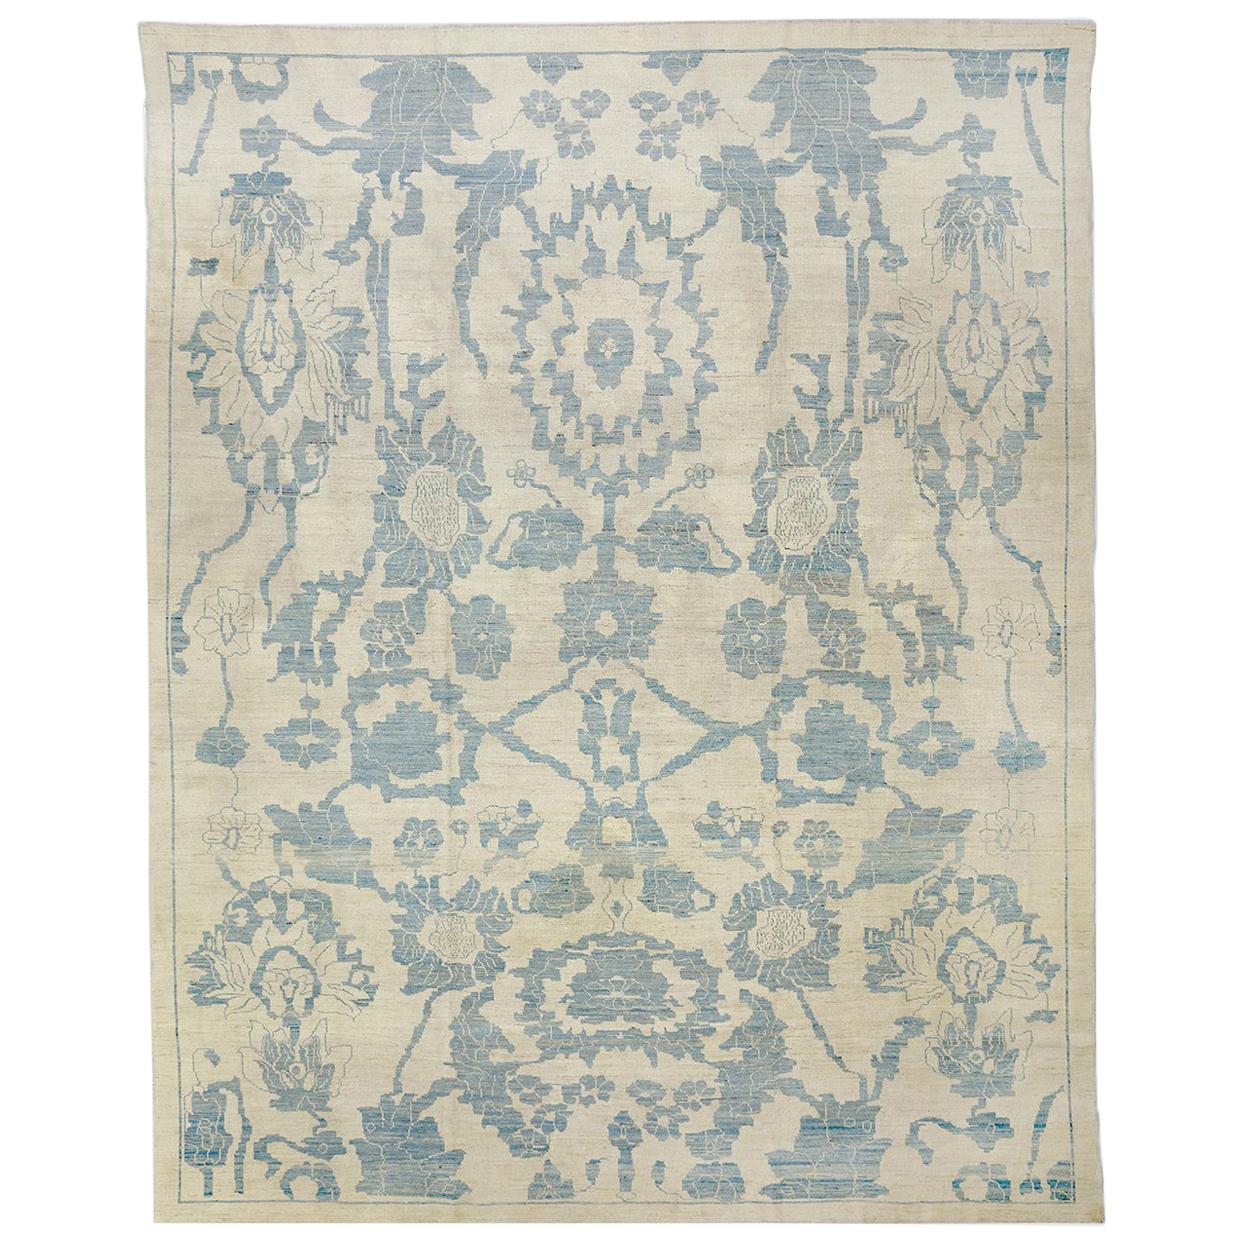 New Turkish Oushak Rug with Blue Floral Details on Ivory Field